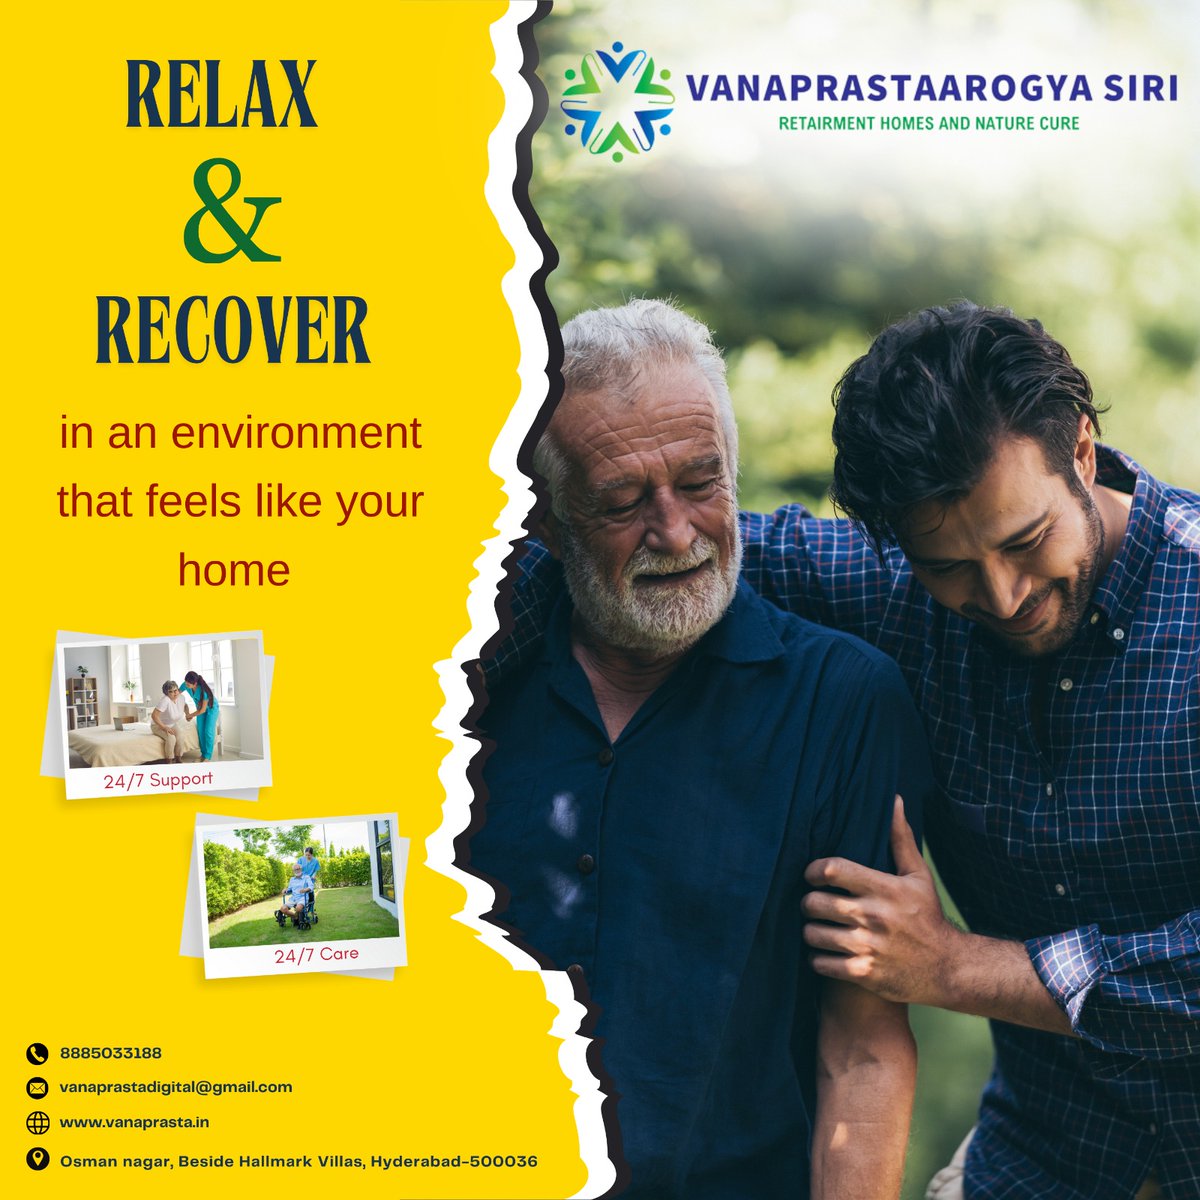 🏡 Experience ultimate relaxation and recovery in a homely environment at Vanaprasta Arogya Siri! 🧘‍♀️

#VanaprastaArogyaSiri #RelaxAndRecover #HomeAwayFromHome #SeniorWellness #TranquilRooms #OrganicMeals #MedicalCare #HealthAndHappiness #naturecare #meditationhall #gym #milletes